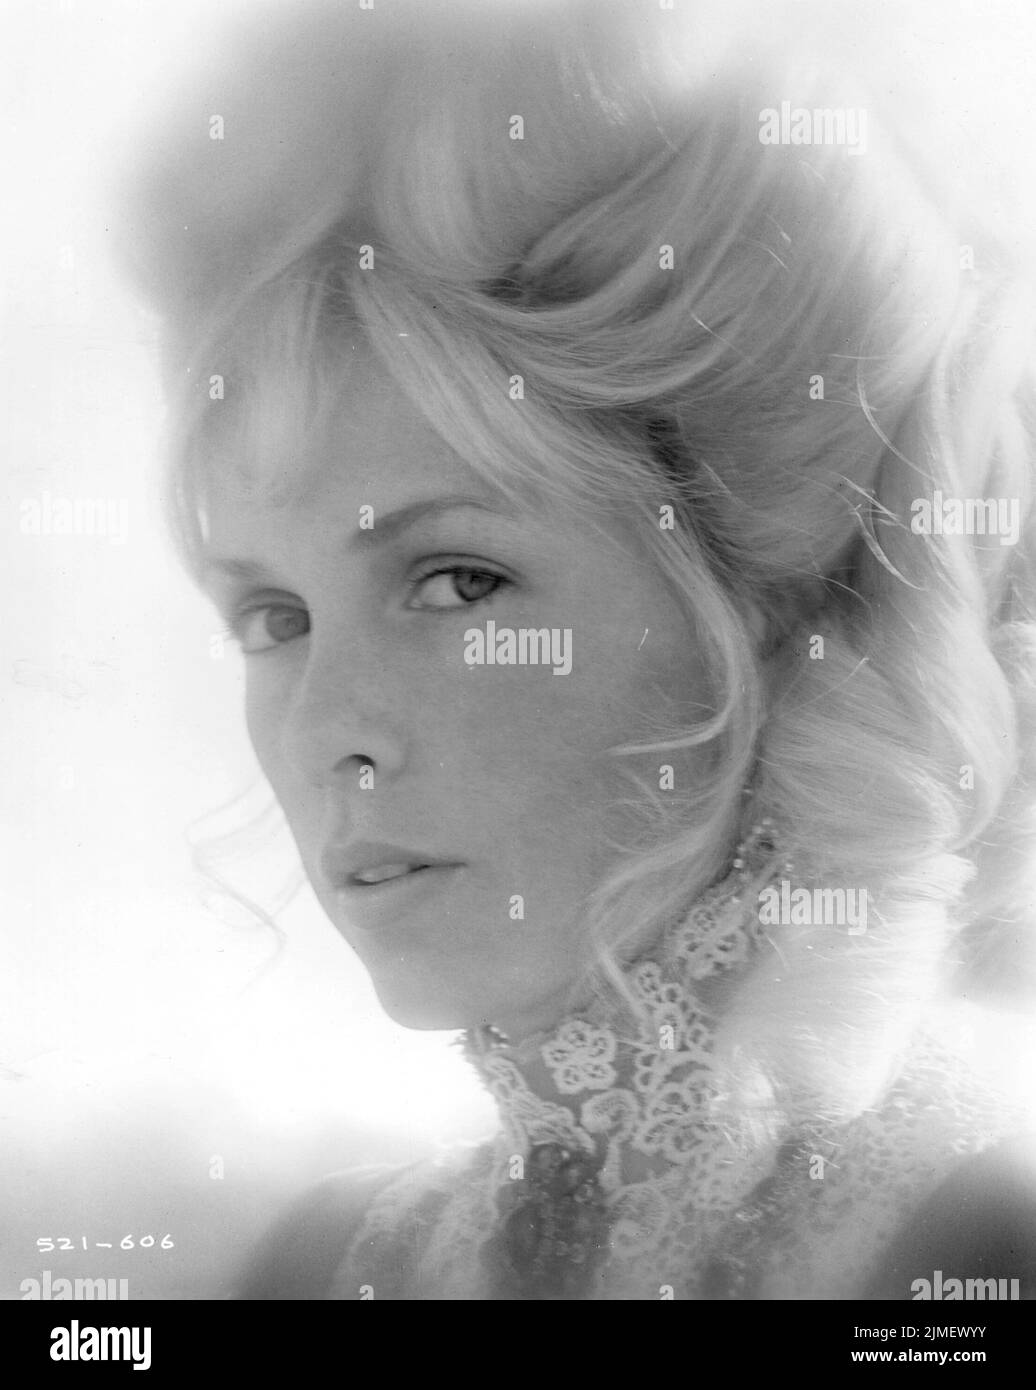 STELLA STEVENS in THE BALLAD OF CABLE HOGUE (1970), directed by SAM PECKINPAH. Credit: WARNER BROTHERS / Album Stock Photo